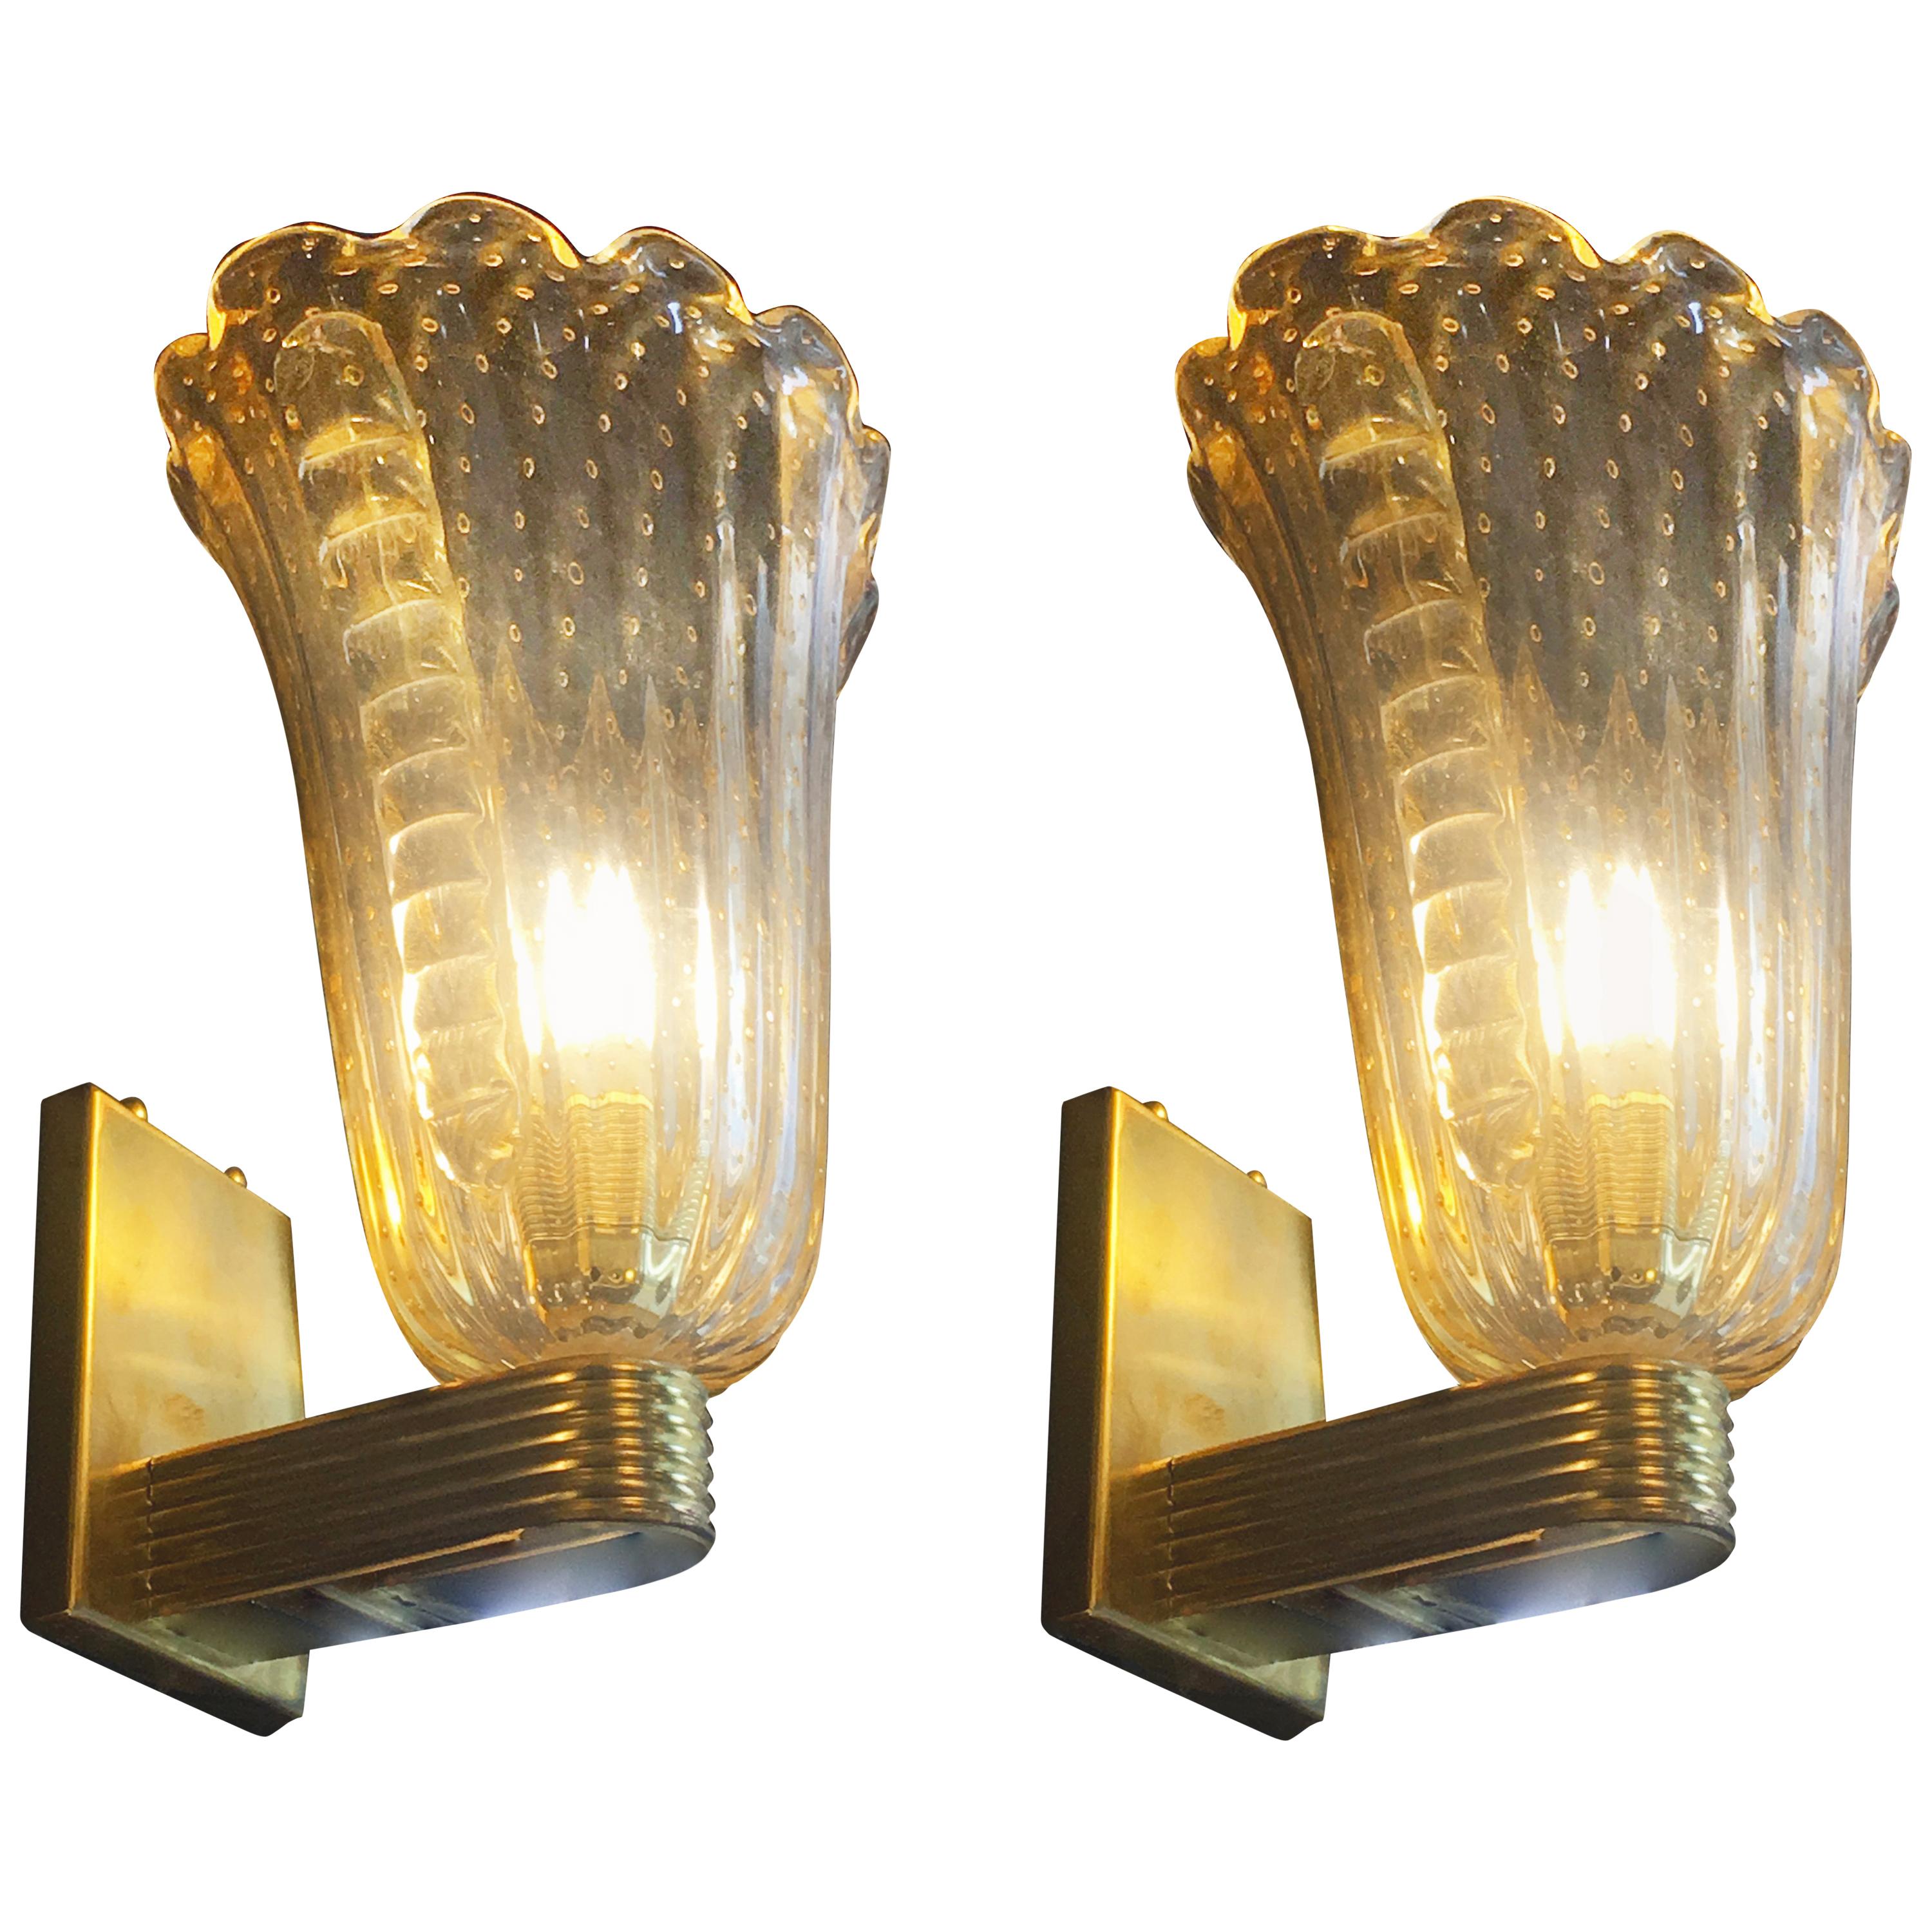 Fabulous Pair of Sconces 24-Karat Gold by Barovier and Toso, Murano, 1950s 5